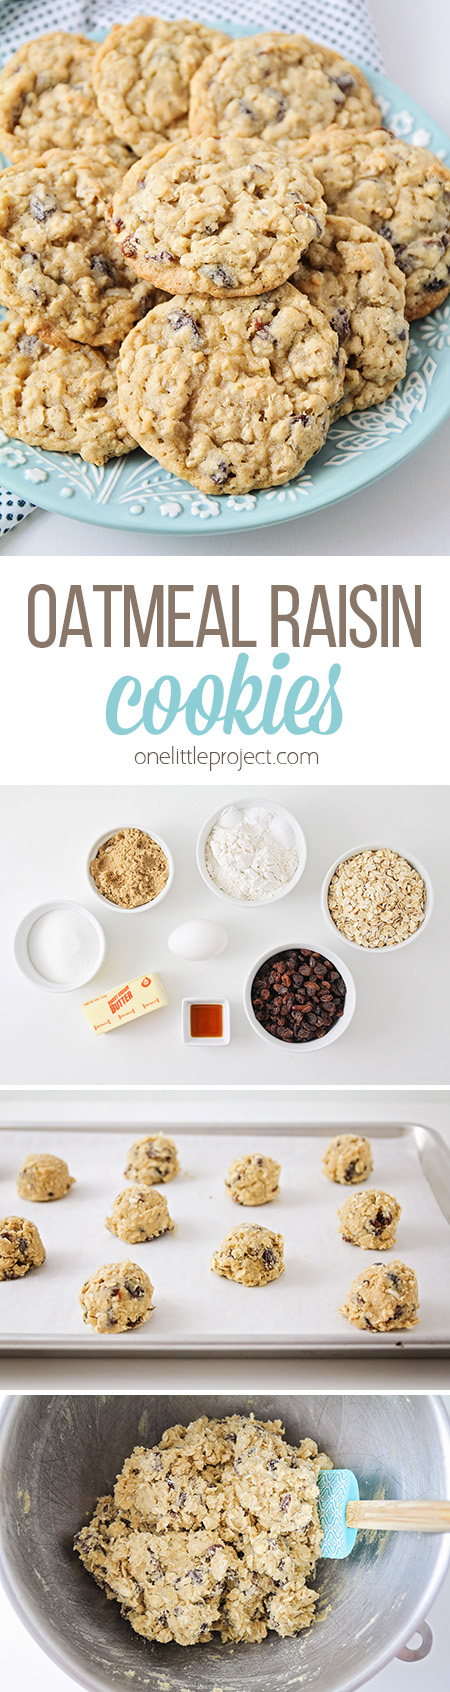 These chewy and sweet oatmeal raisin cookies are easy to make and perfectly delicious. A classic cookie that never disappoints!